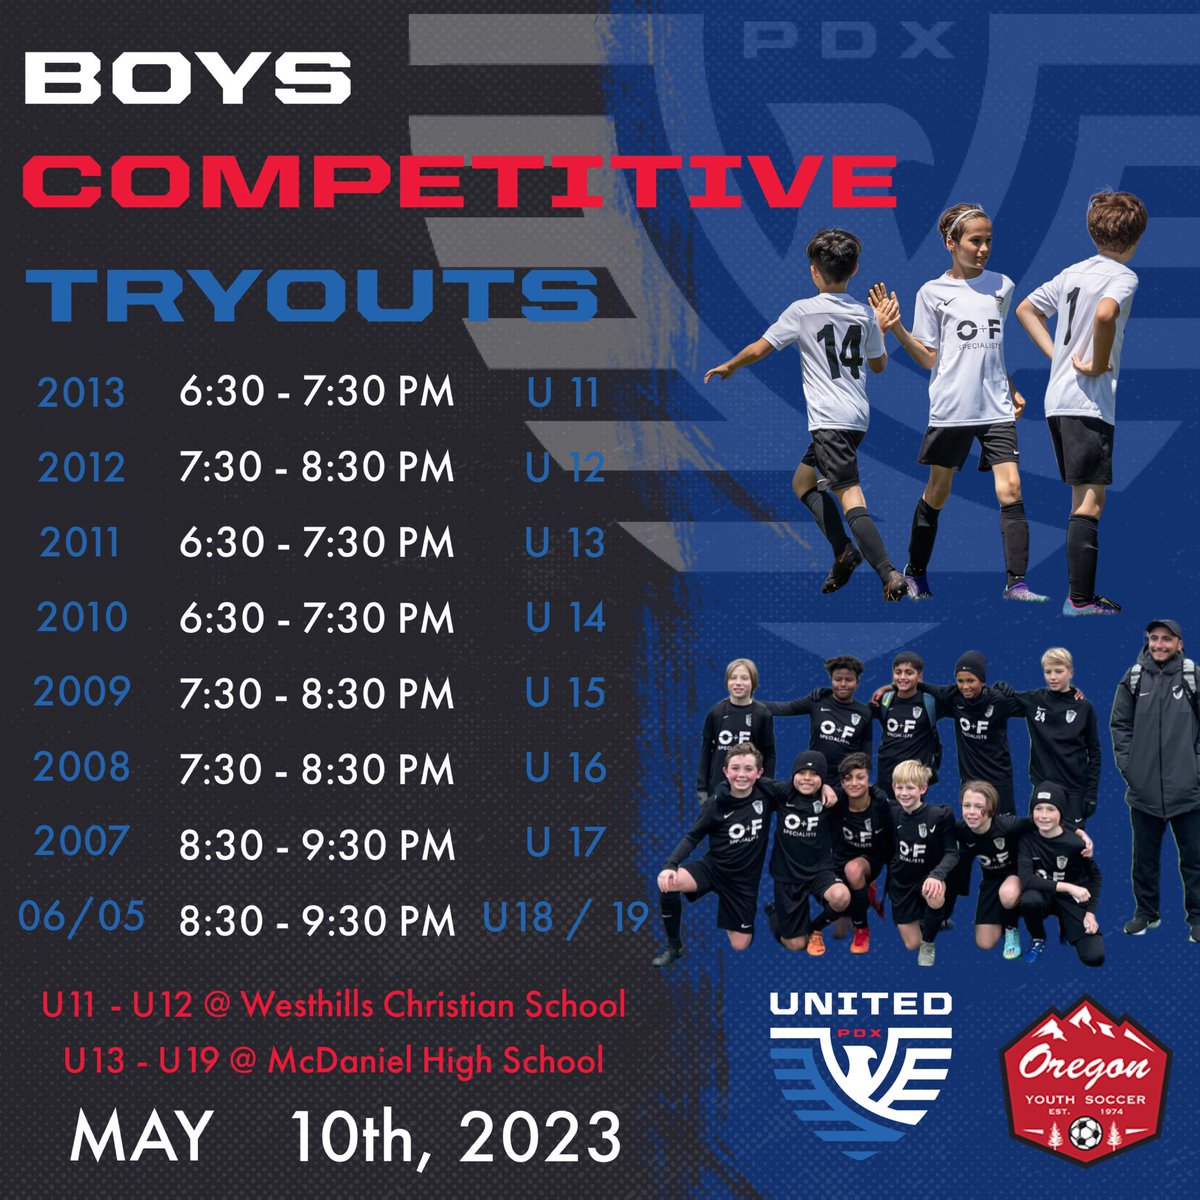 🚨Competitive Tryouts🚨 Competitive Tryouts Begin Tonight! 

Registration is still open be sure to register to get the latest updates. unitedpdx.com 

#WeAreUnited #UnitedIsTheFuture #PlayUnited #PortlandsClub